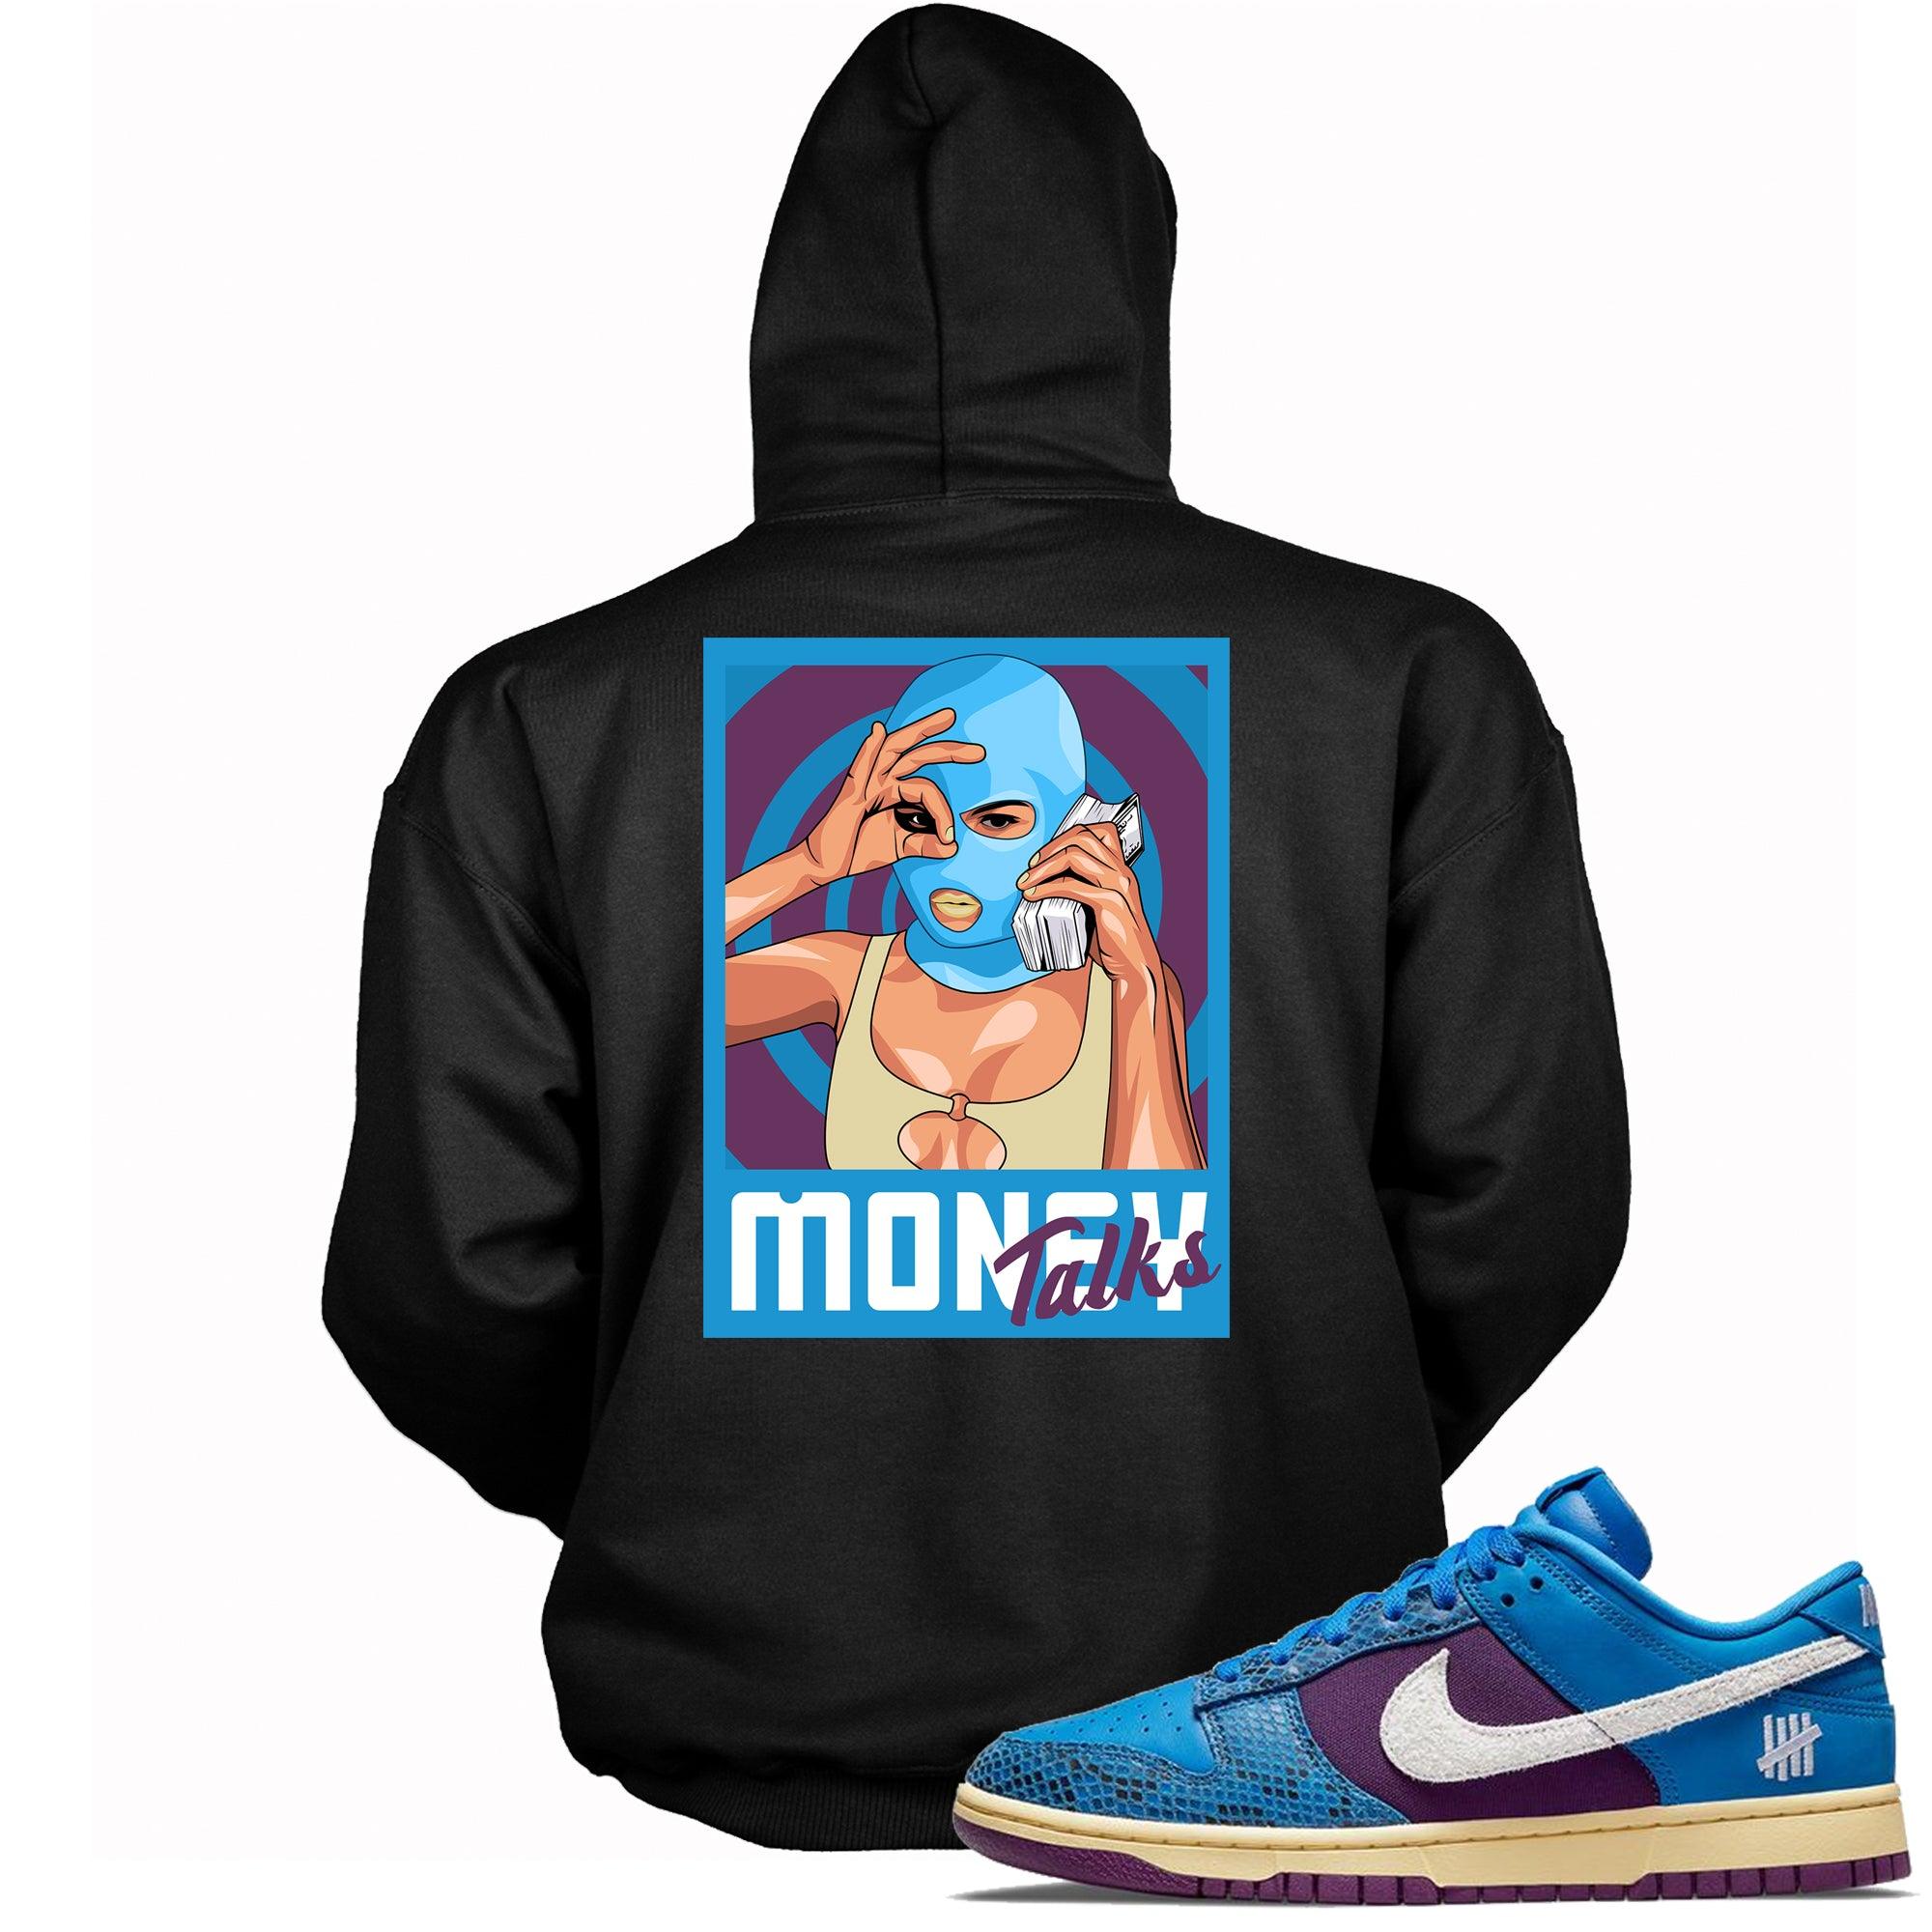 Money Talks Hoodie Nike Dunk Low Undefeated 5 On It Dunk vs AF1 Sneakers photo